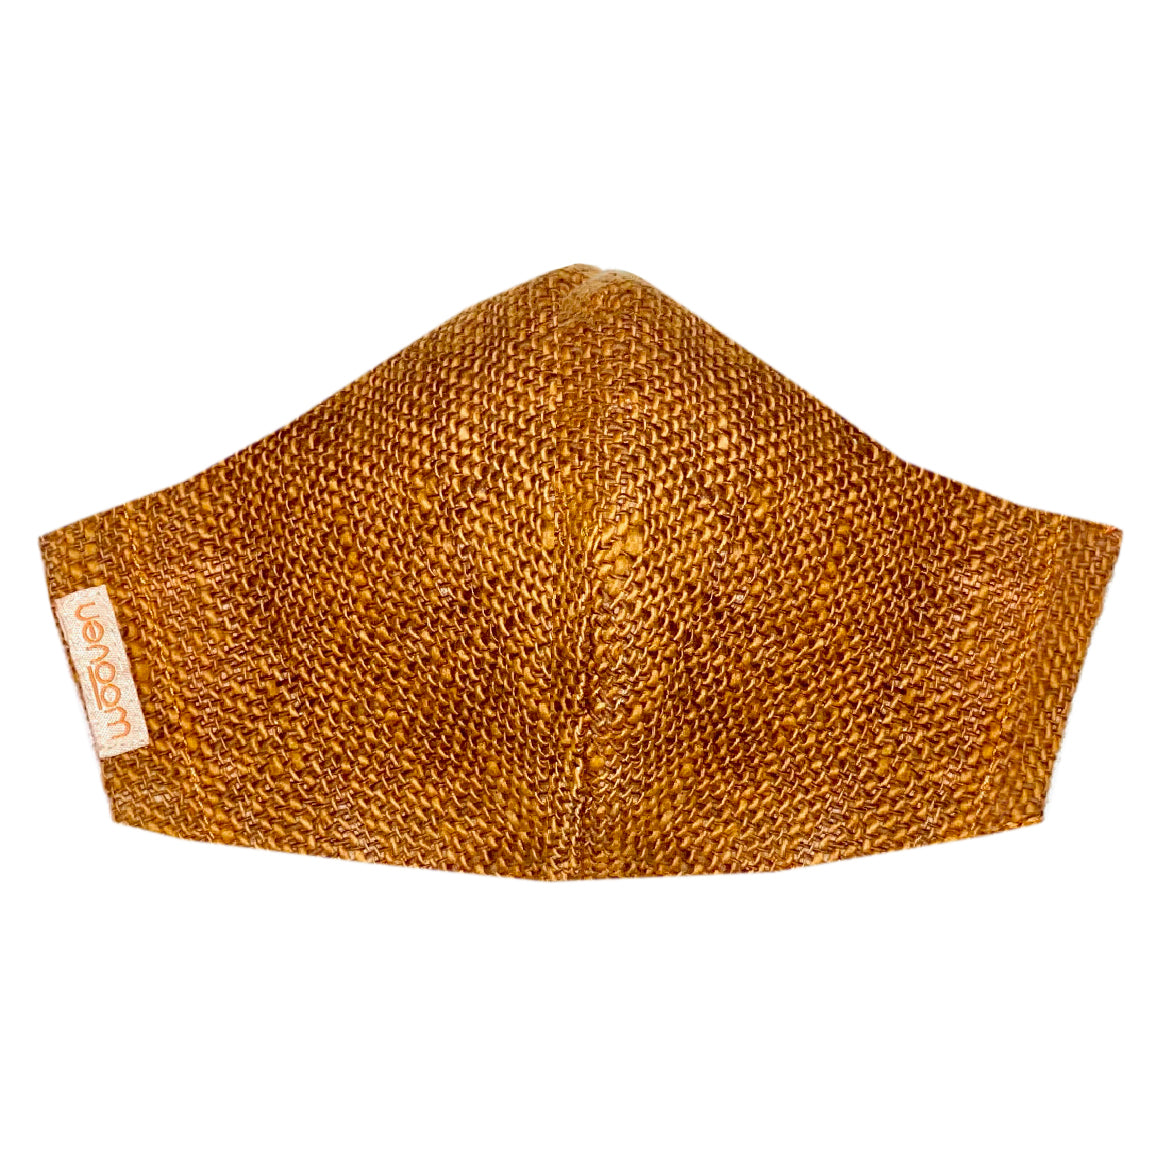 "Solid Gold" Cotton Face Mask with ear loops